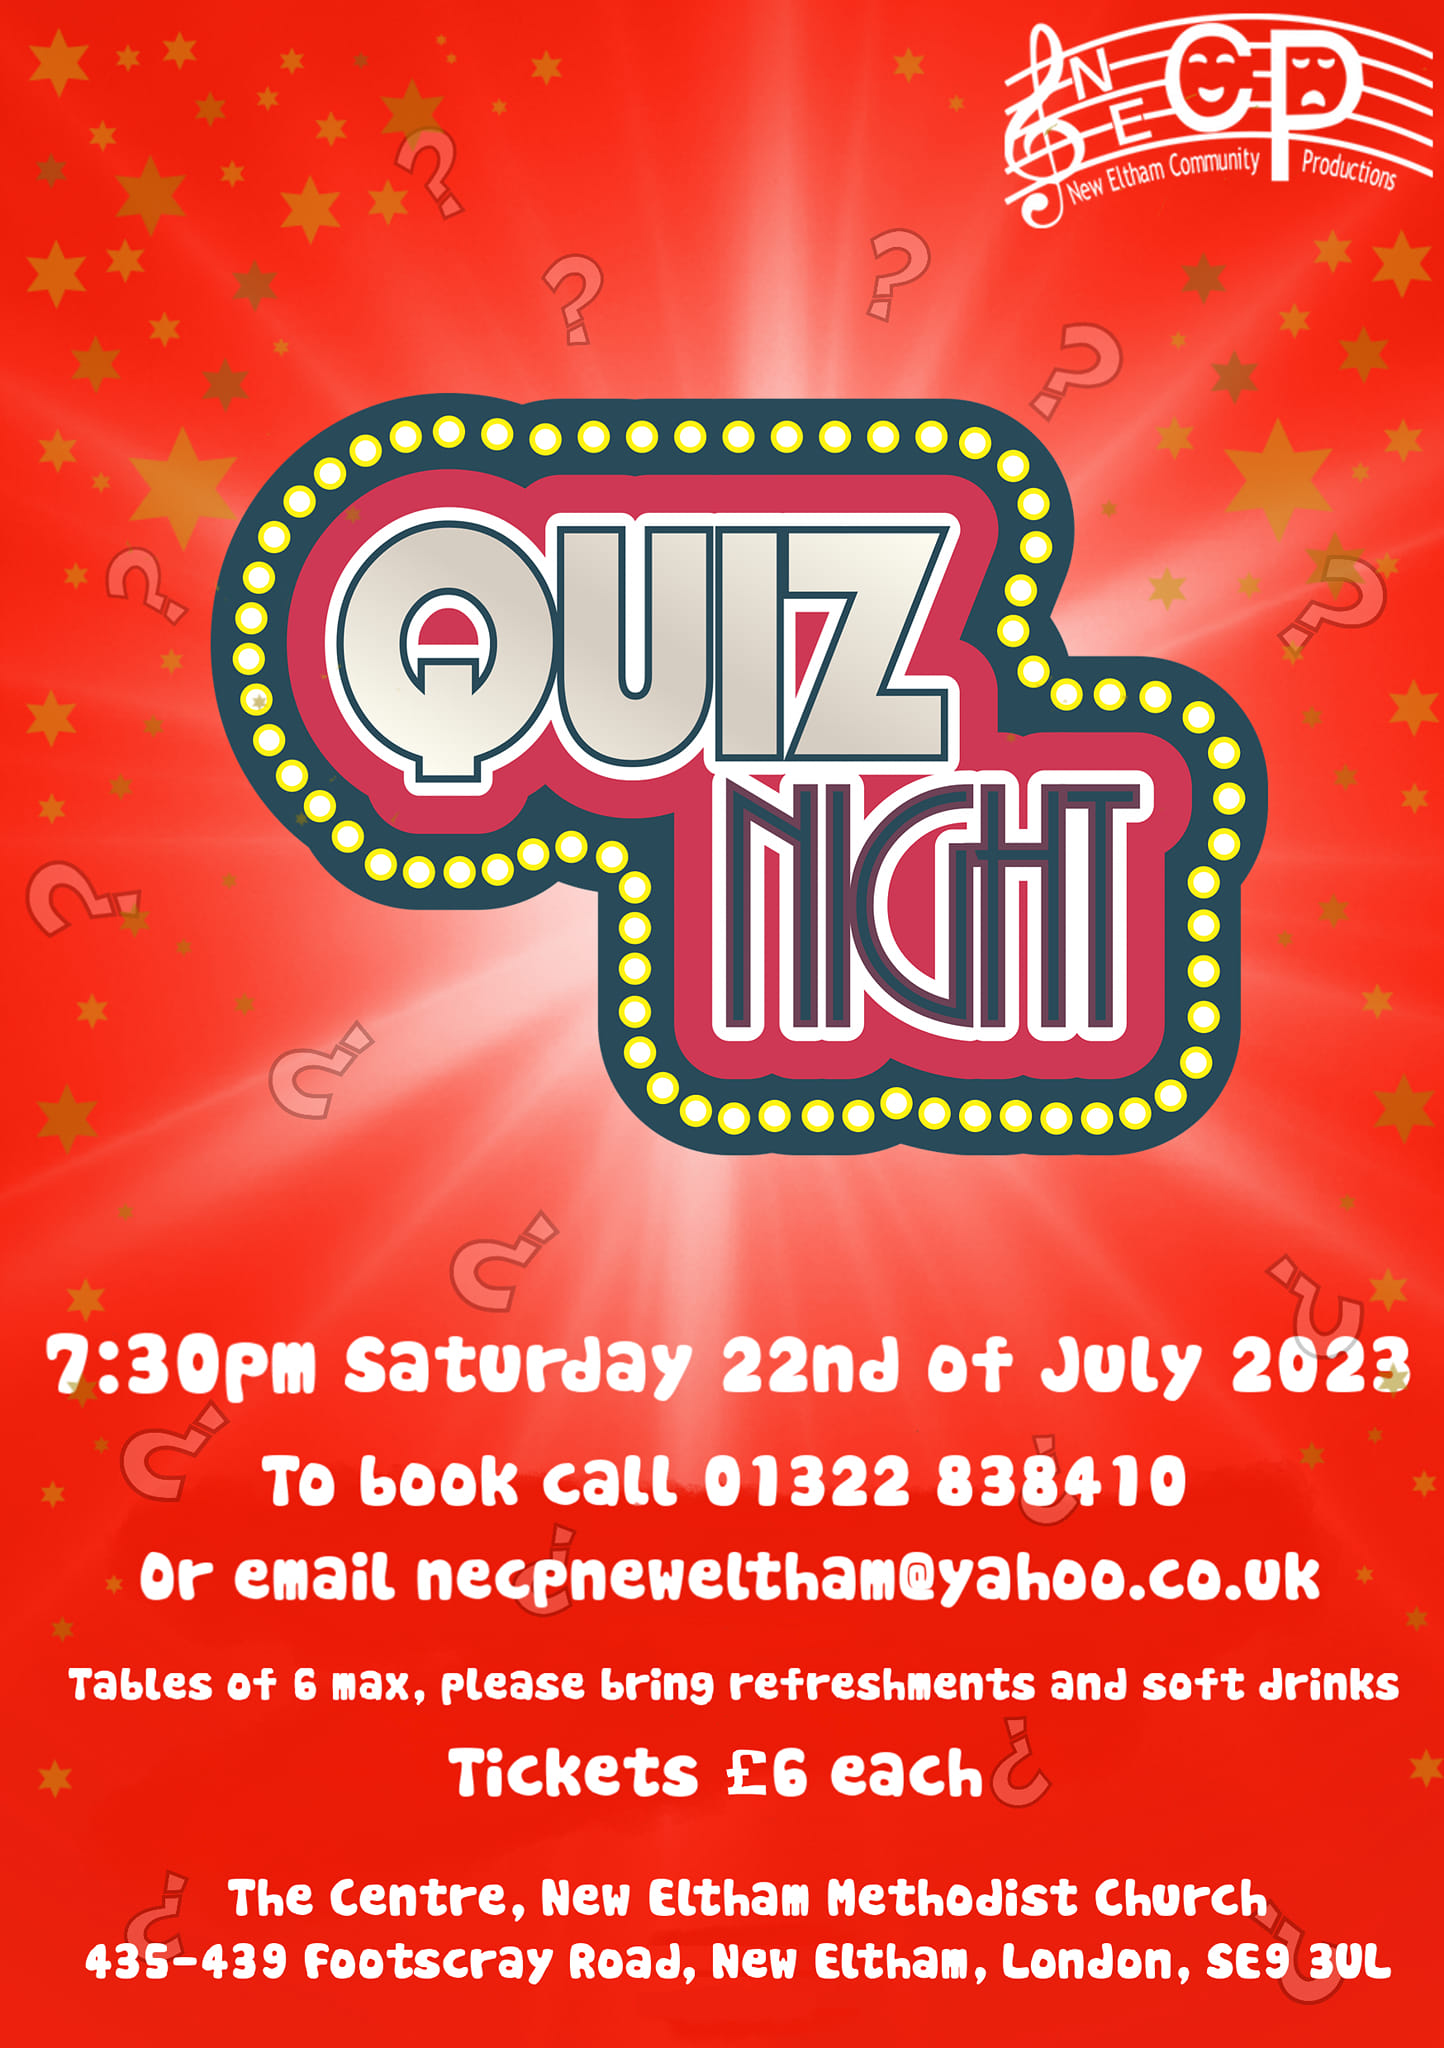 Red poster with "quiz night" with event details written